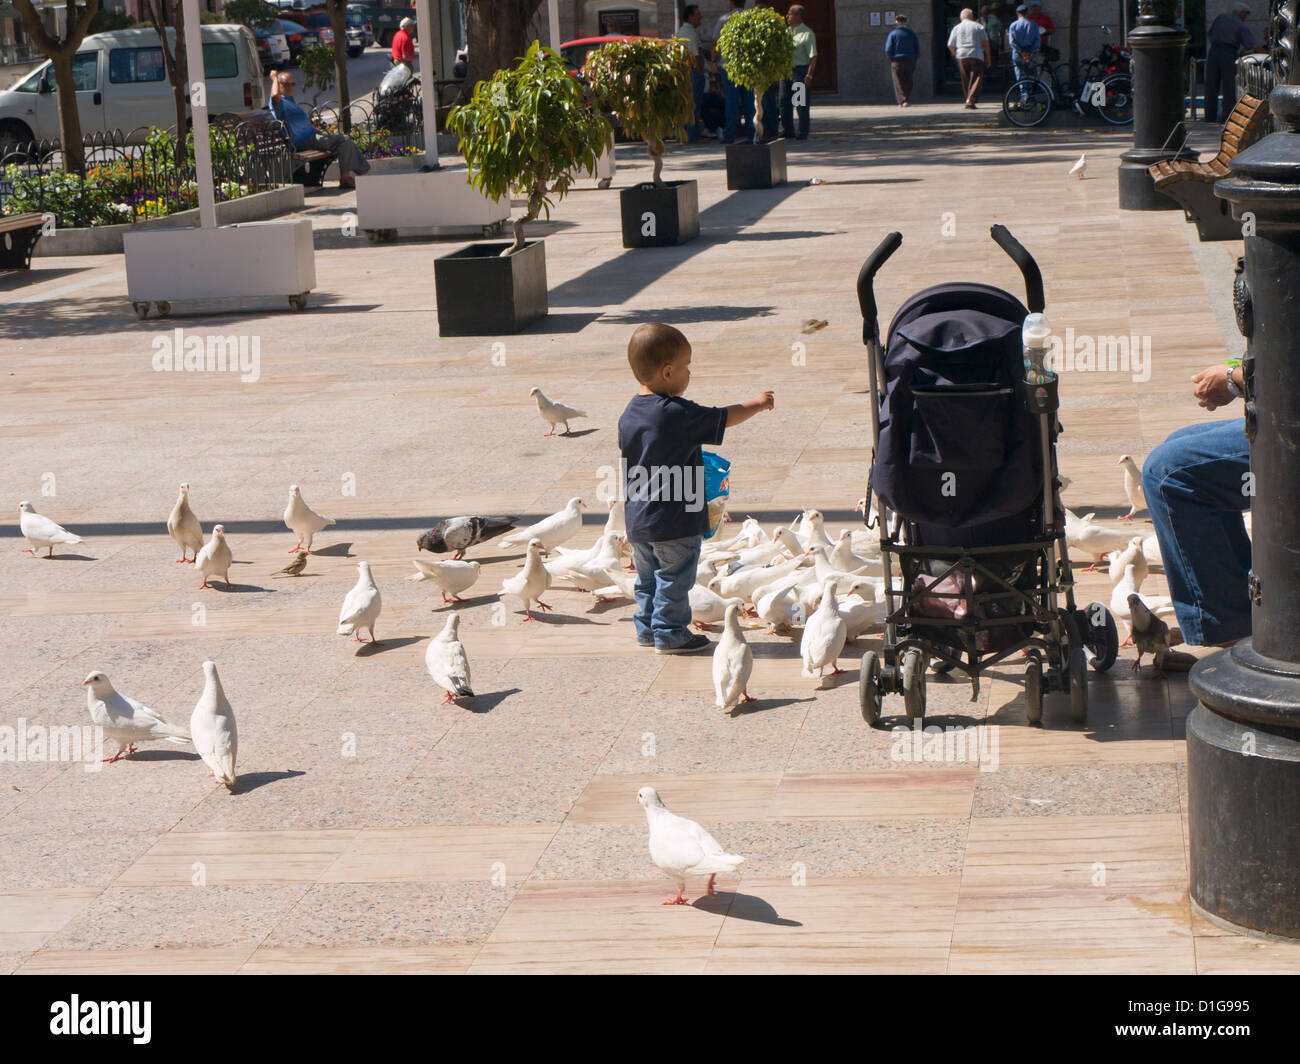 White peace pigeons in a park in Aguilas, Murcia Spain, being fed by toddler with a pram Stock Photo